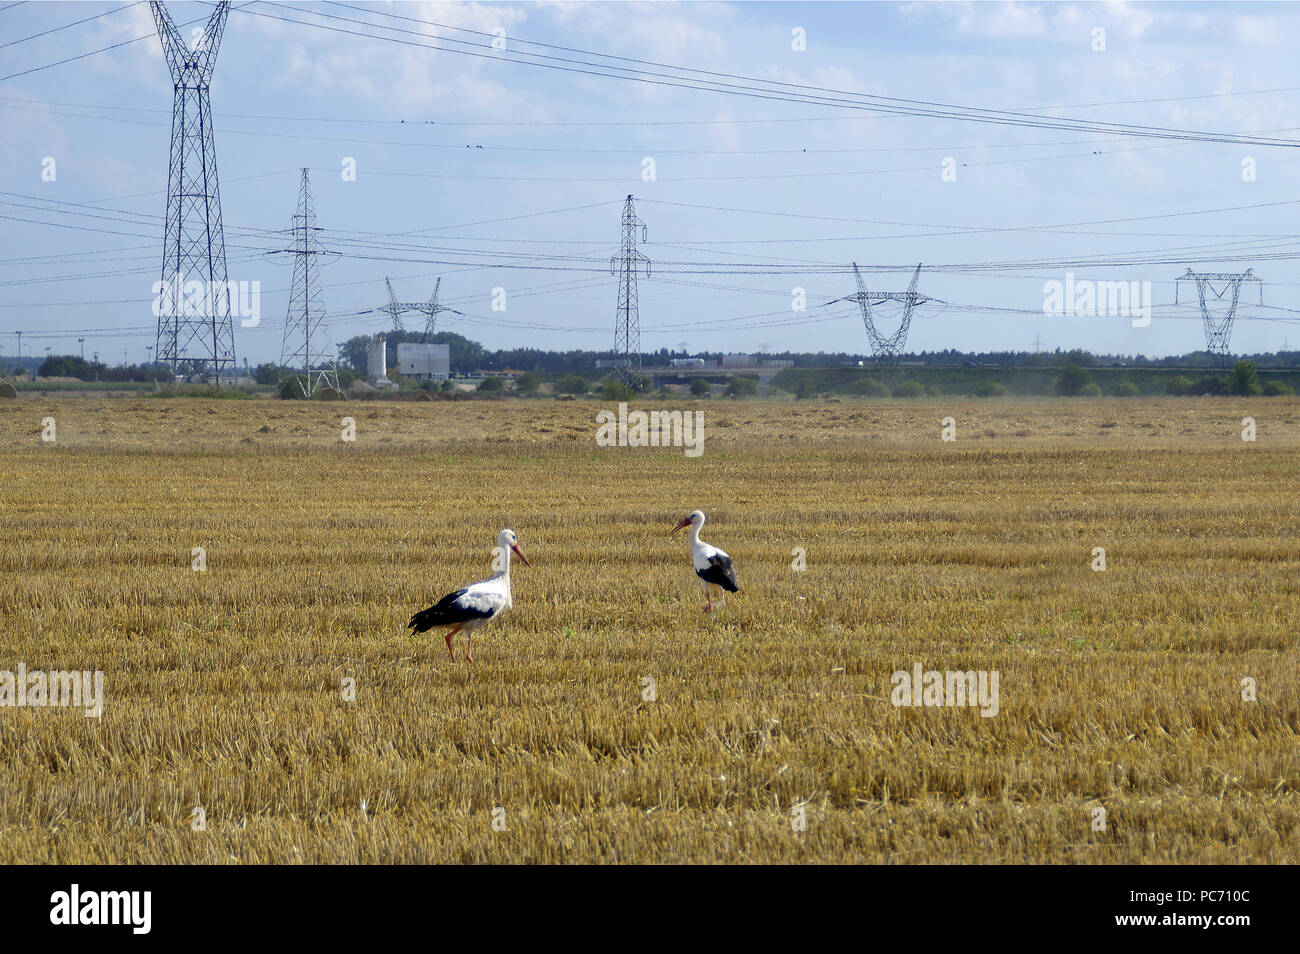 Storks and industry landscape on background. Wild birds are walking on the mowed field after harvesting. European agriculture rural scene. Stock Photo